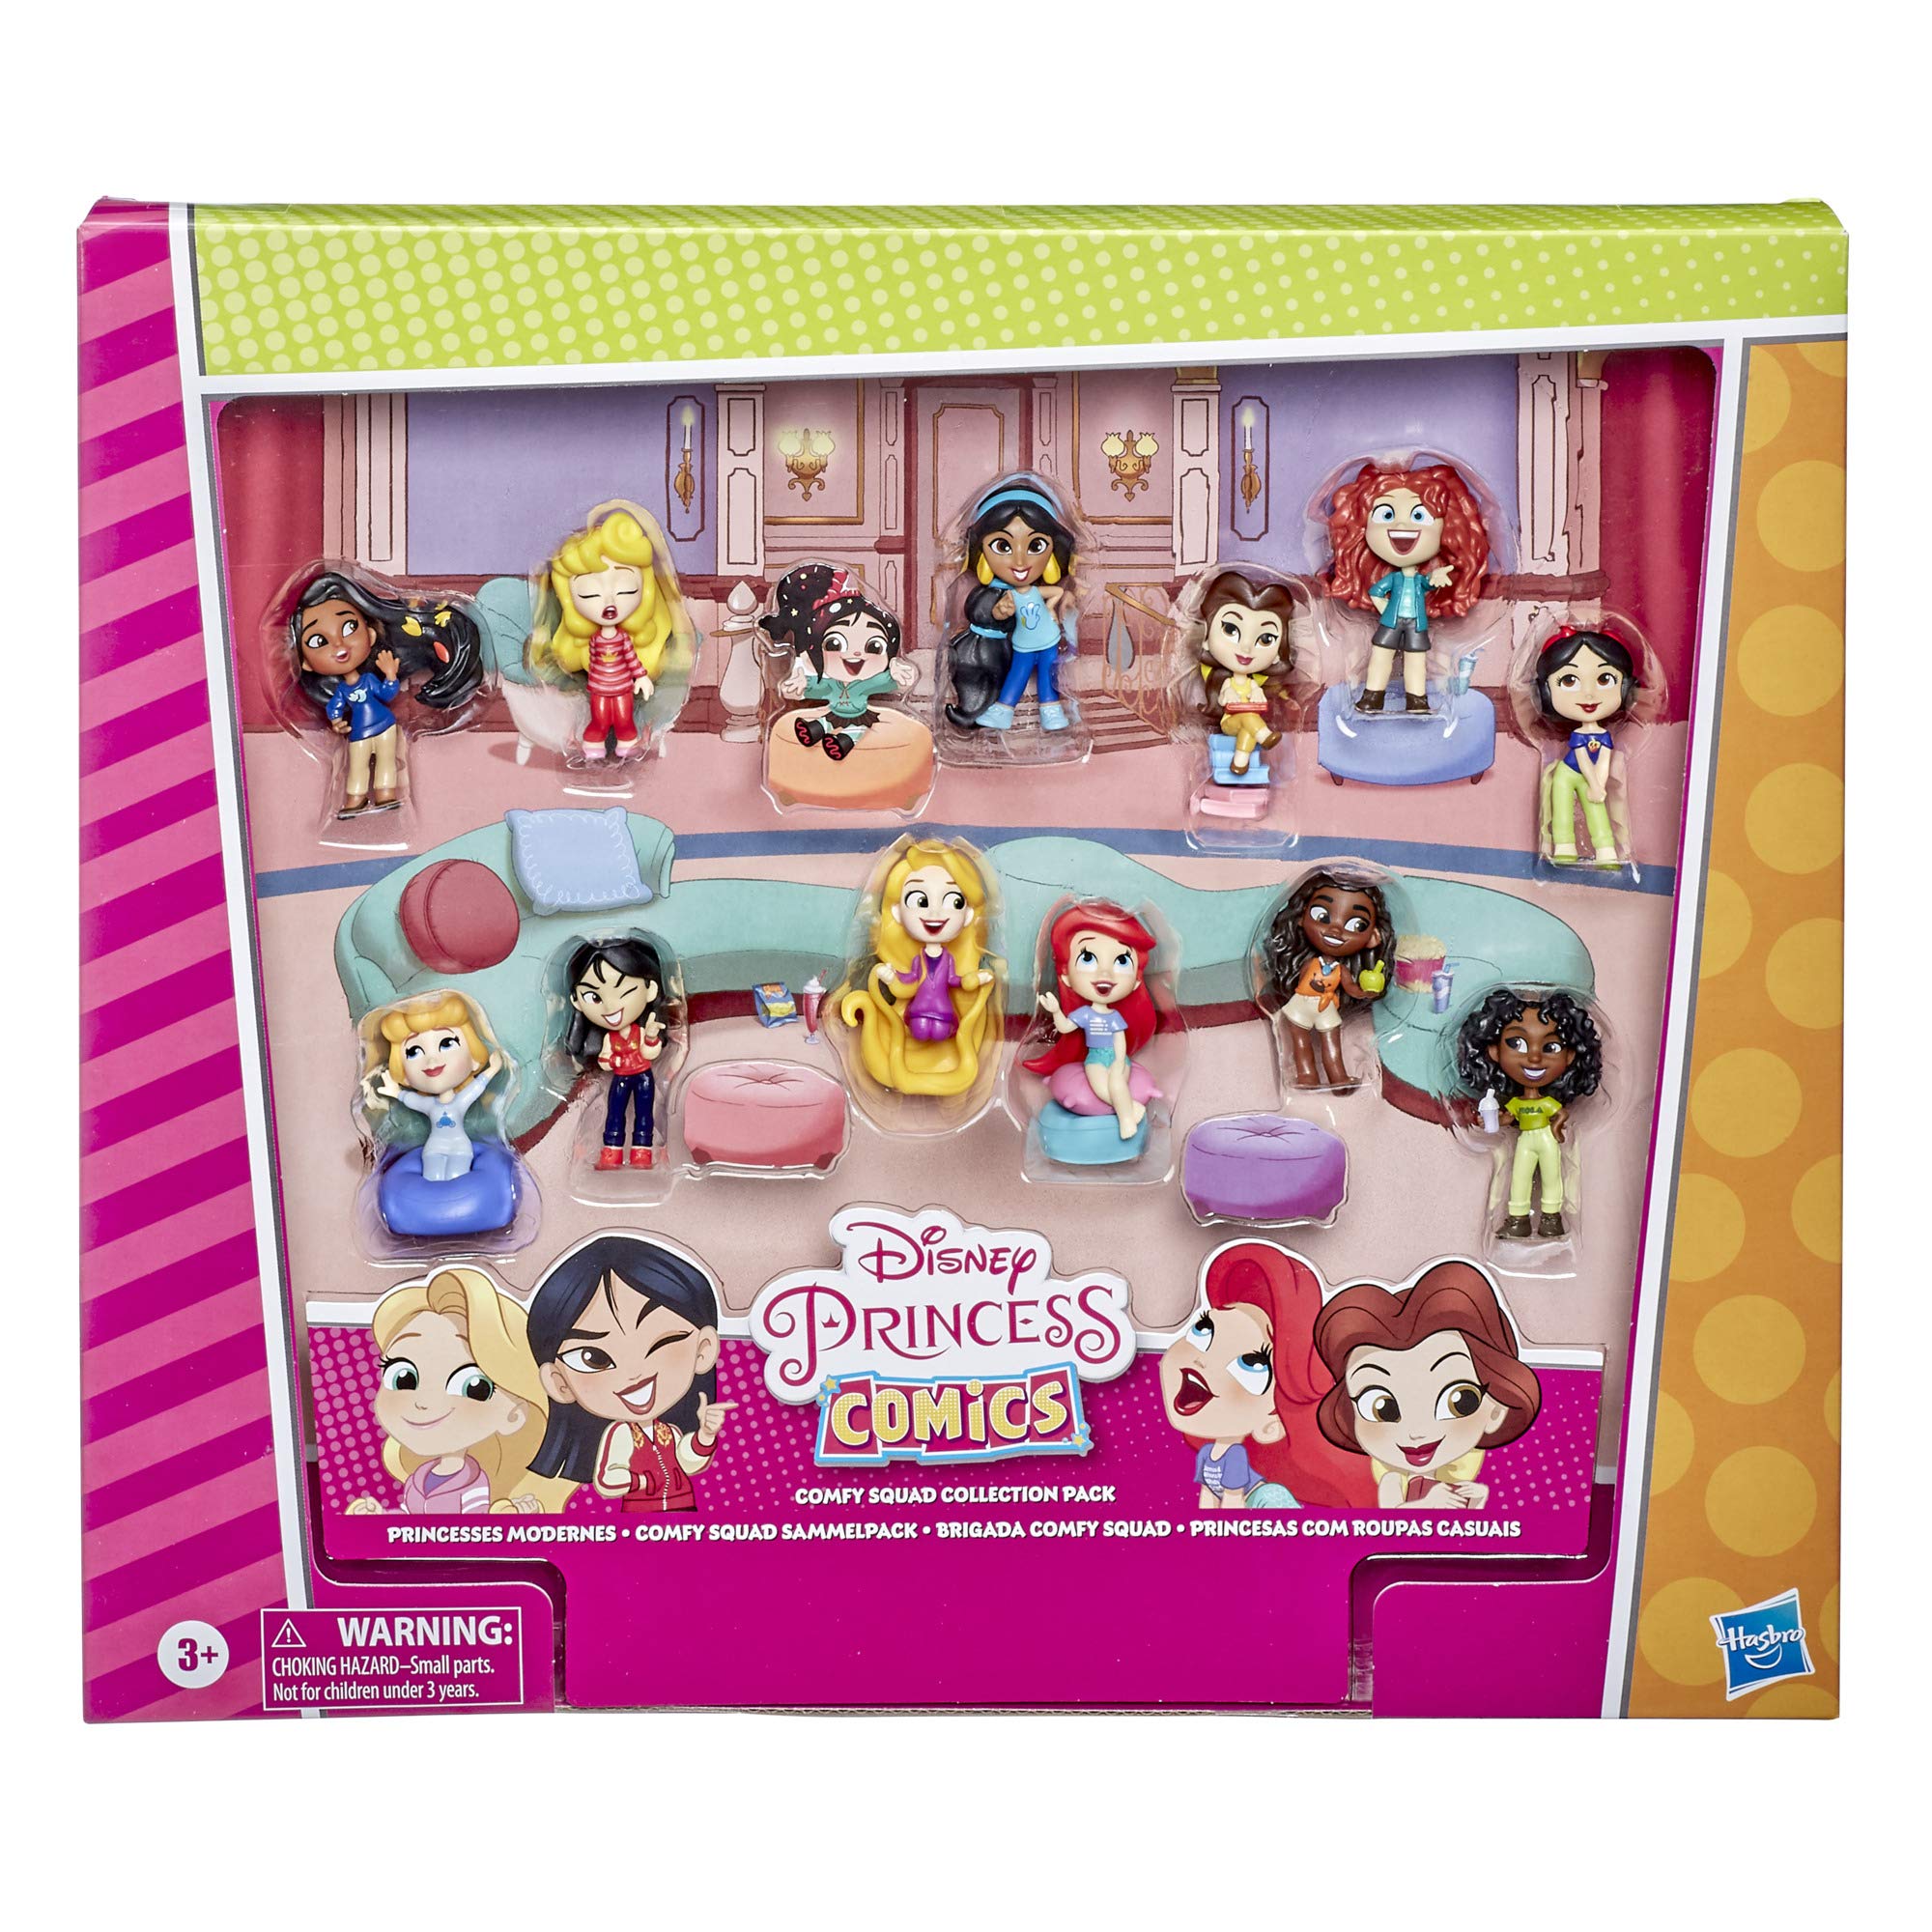 Disney Princess Comics Minis Comfy Squad Collection Pack, 12 Dolls Collectable Toy for Girls 3 Years and Up